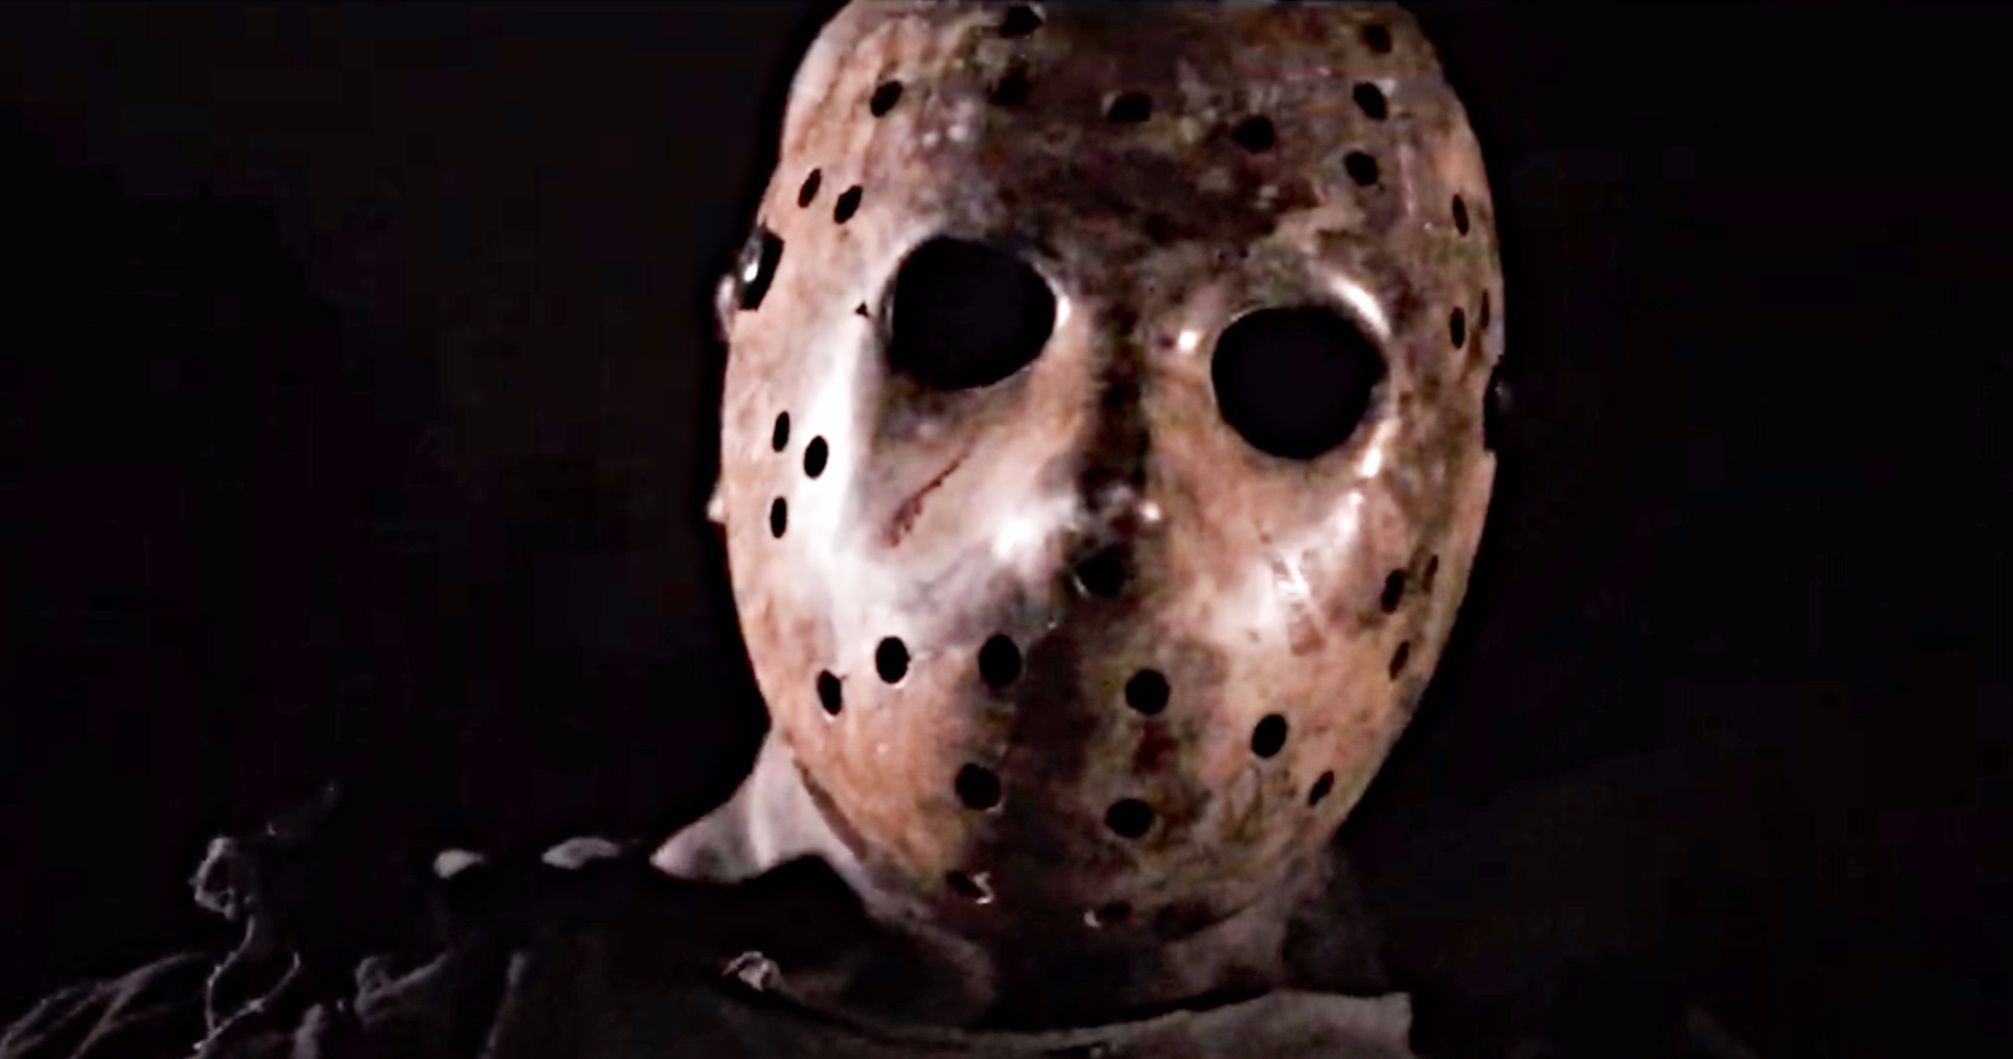 Voorhees Fan Film Resurrects Jason Just in Time for Friday the 13th